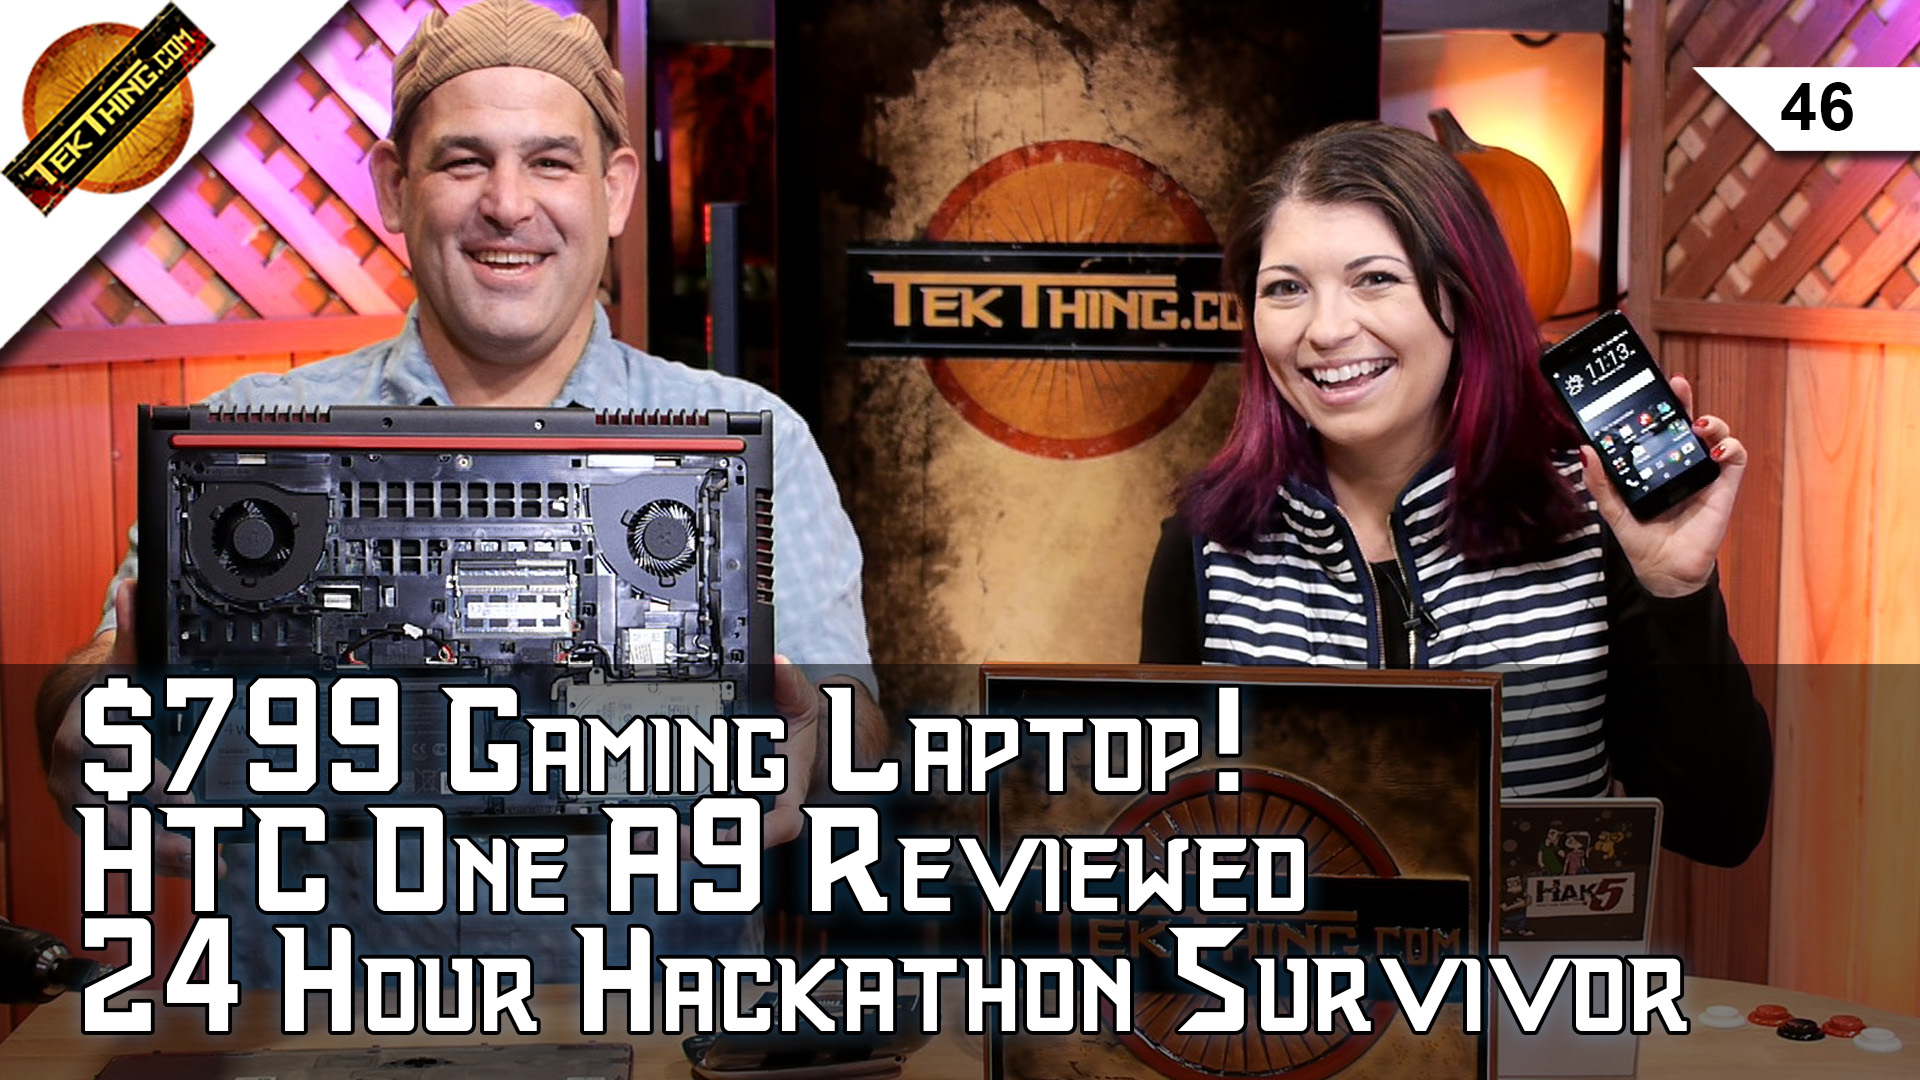 TekThing 46: Dell’s $799 Gaming Laptop, HTC One A9 Review, Hackathon How-To, Clean A Projector Screen, Gig City!